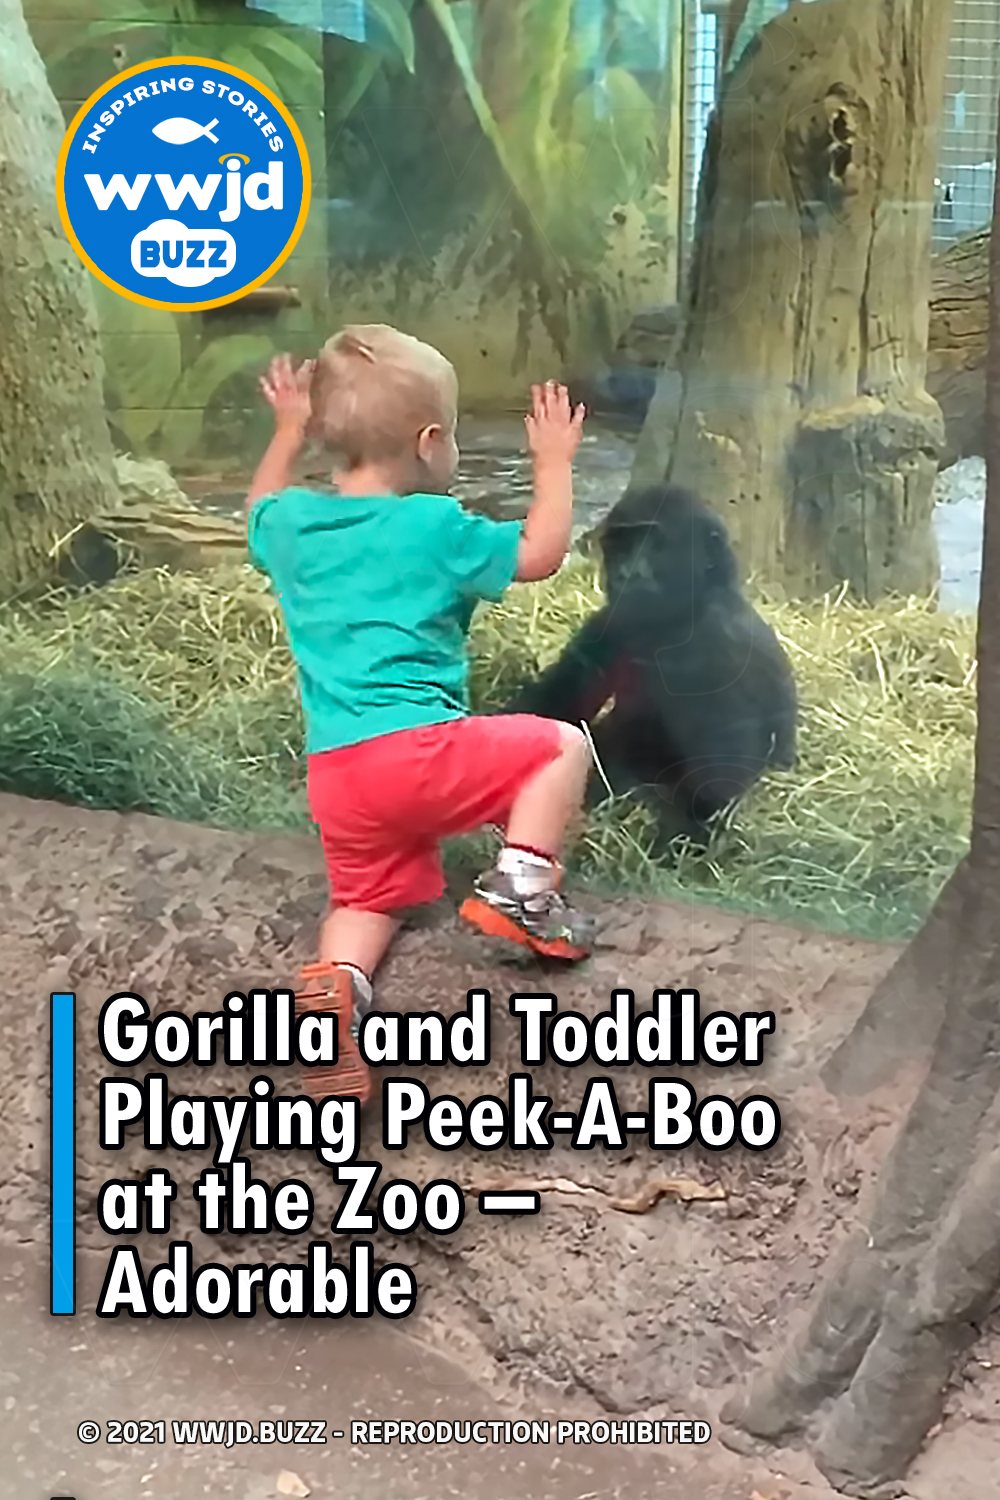 Gorilla and Toddler Playing Peek-A-Boo at the Zoo - Adorable